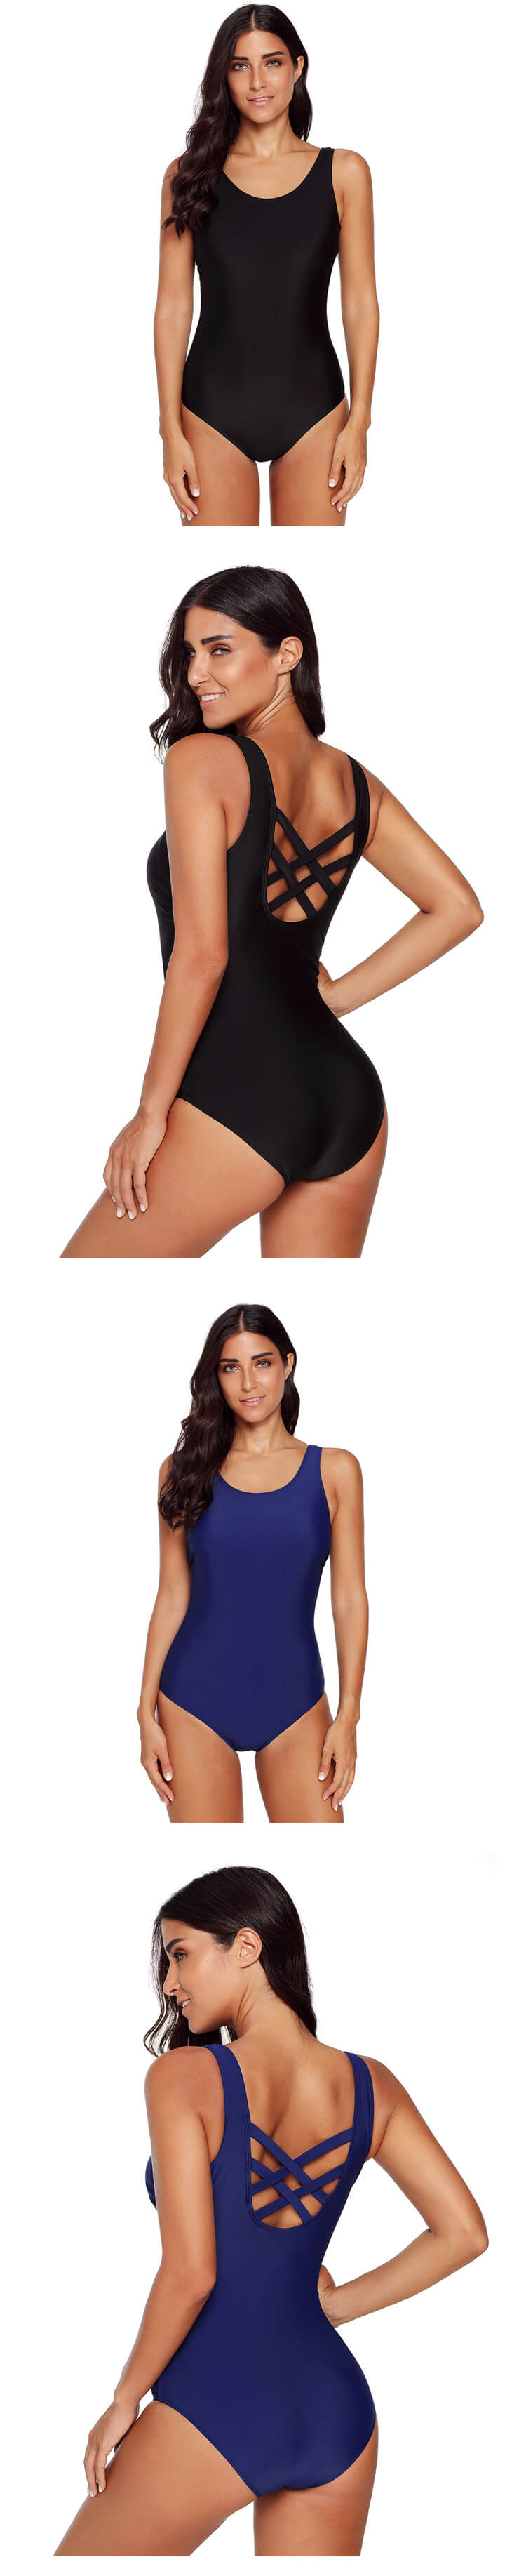 Women's One Piece Swimsuits for Athletic Training Swimwear (4)